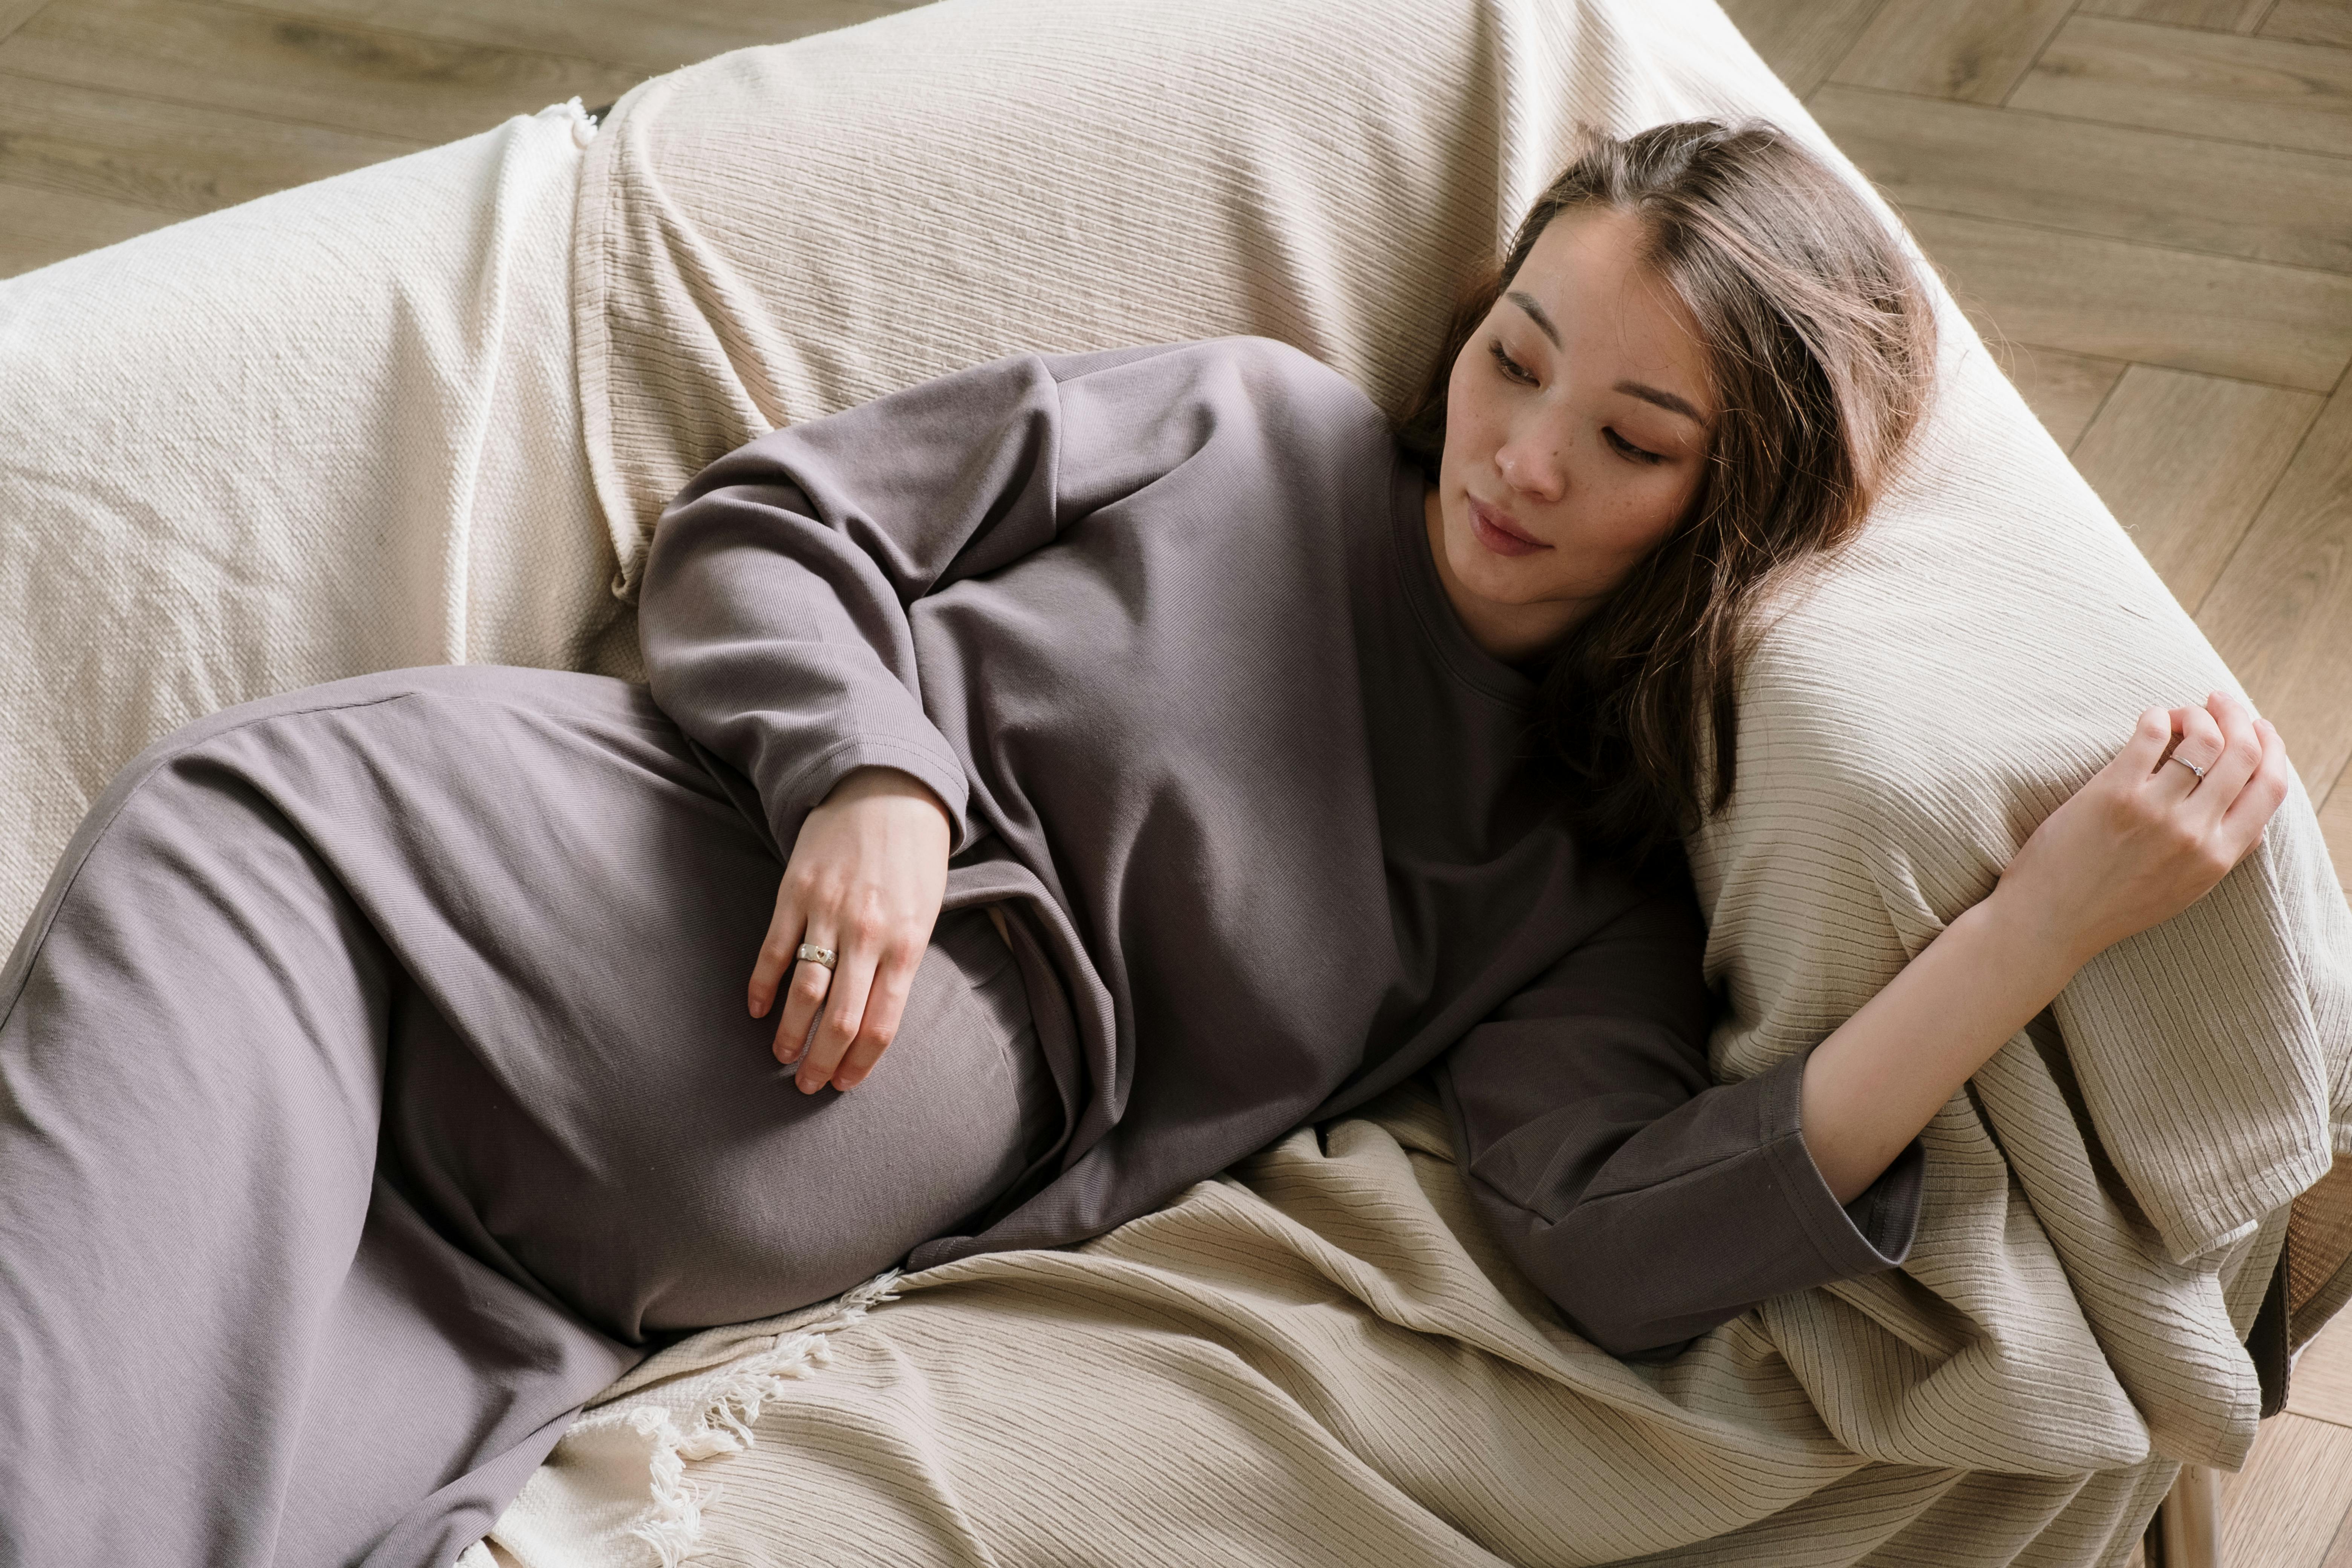 A pregnant woman lying on a couch | Source: Pexels